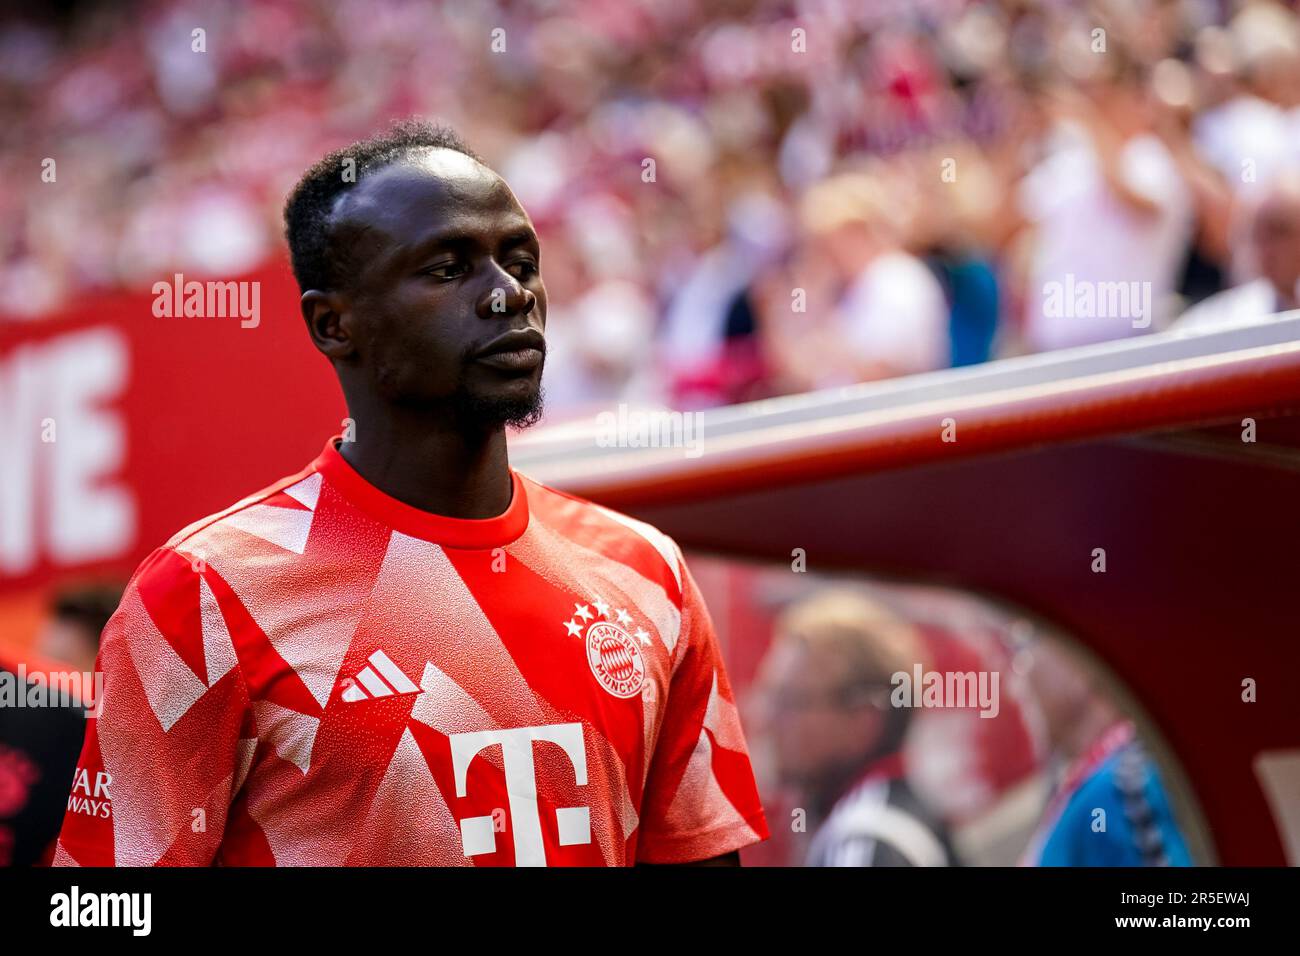 COLOGNE, GERMANY - MAY 27: Sadio Mane of FC Bayern Munchen looks on prior to the Bundesliga match between 1. FC Koln and FC Bayern Munchen at the RheinEnergieStadion on May 27, 2023 in Cologne, Germany (Photo by Rene Nijhuis/Orange Pictures) Stock Photo